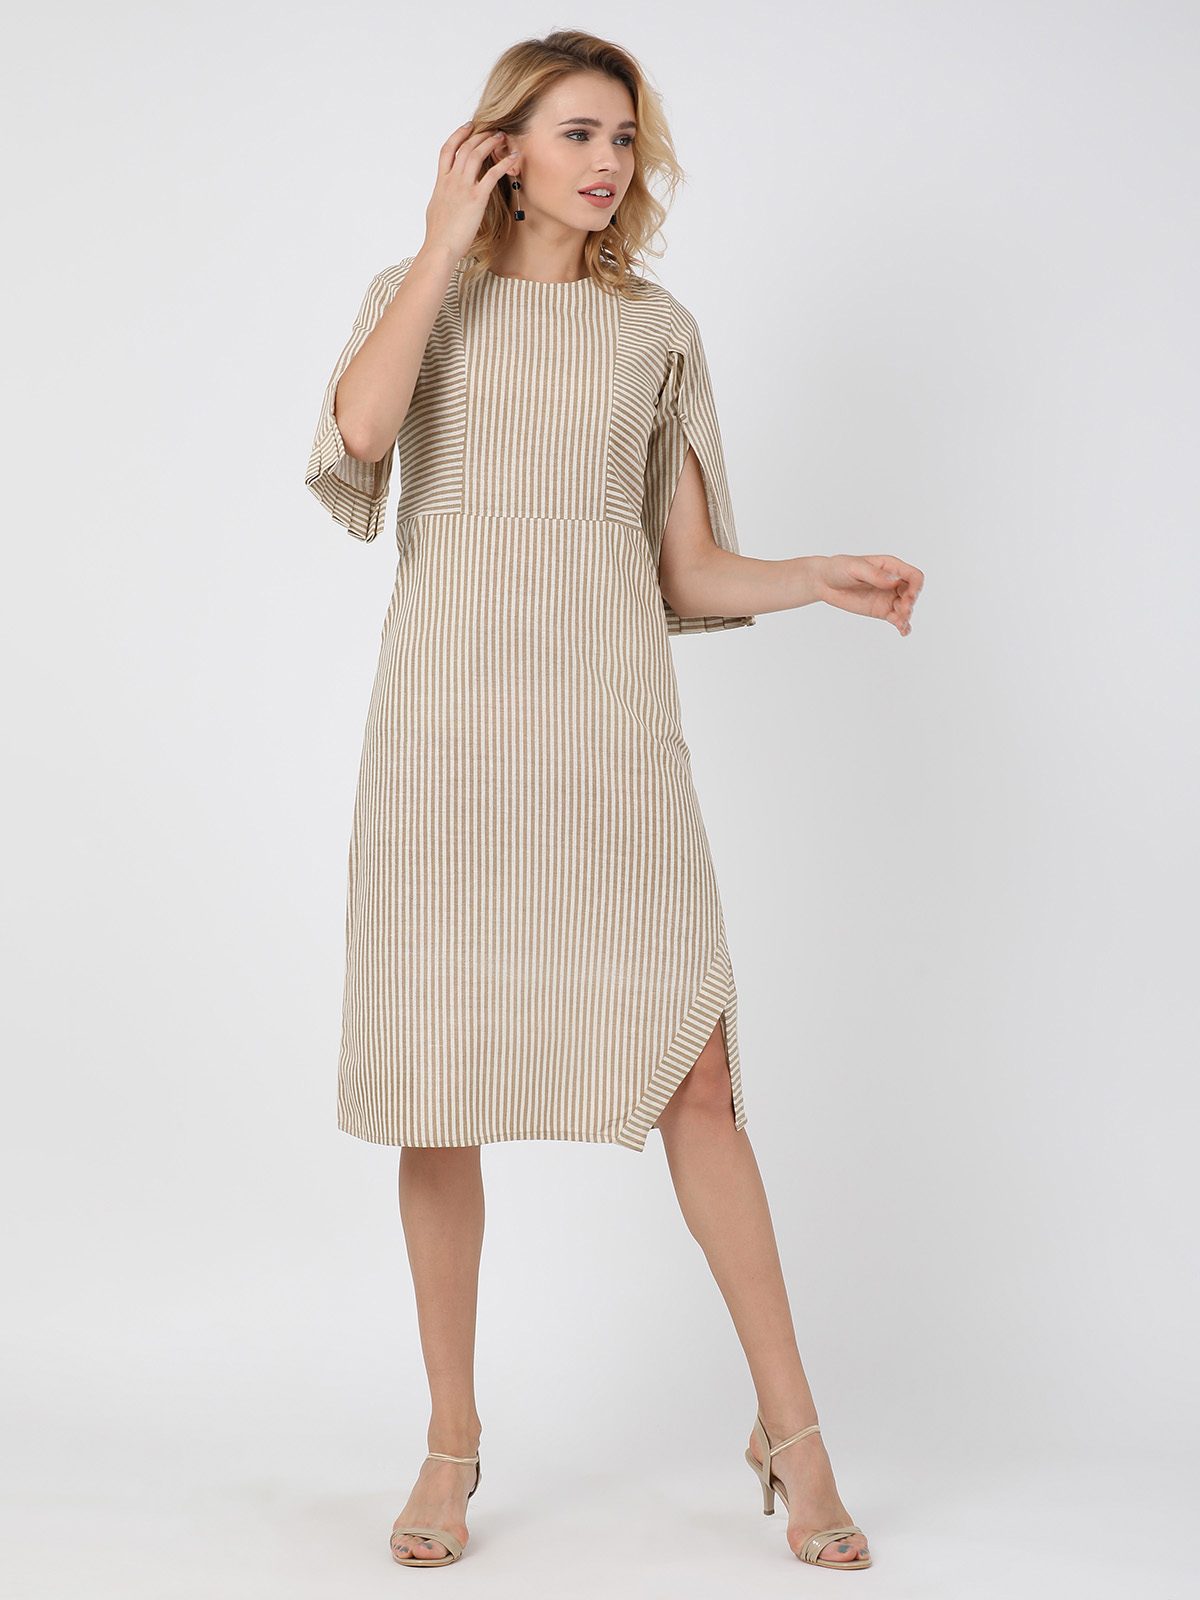 Smartly Cotton Linen 3/4th Open Sleeve One Piece Dress